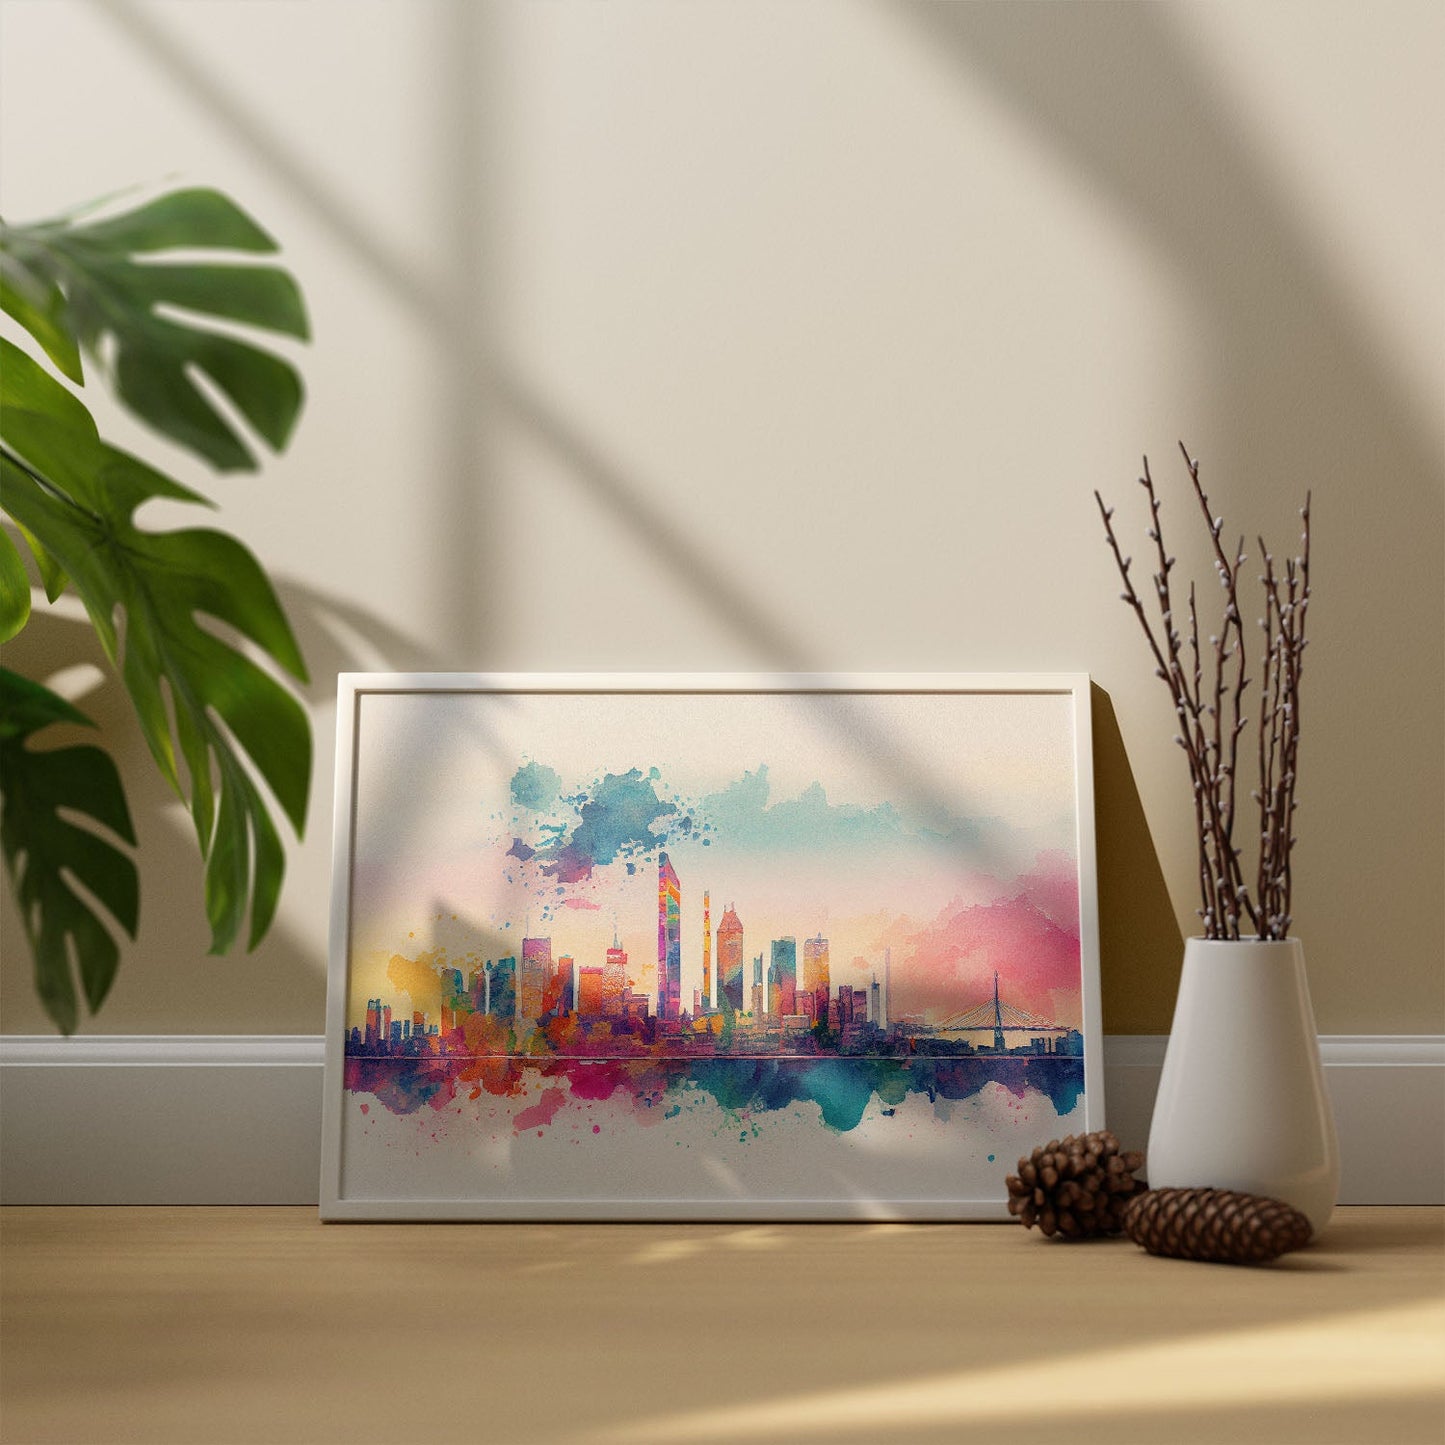 Nacnic watercolor of a skyline of the city of Osaka. Aesthetic Wall Art Prints for Bedroom or Living Room Design.-Artwork-Nacnic-A4-Sin Marco-Nacnic Estudio SL